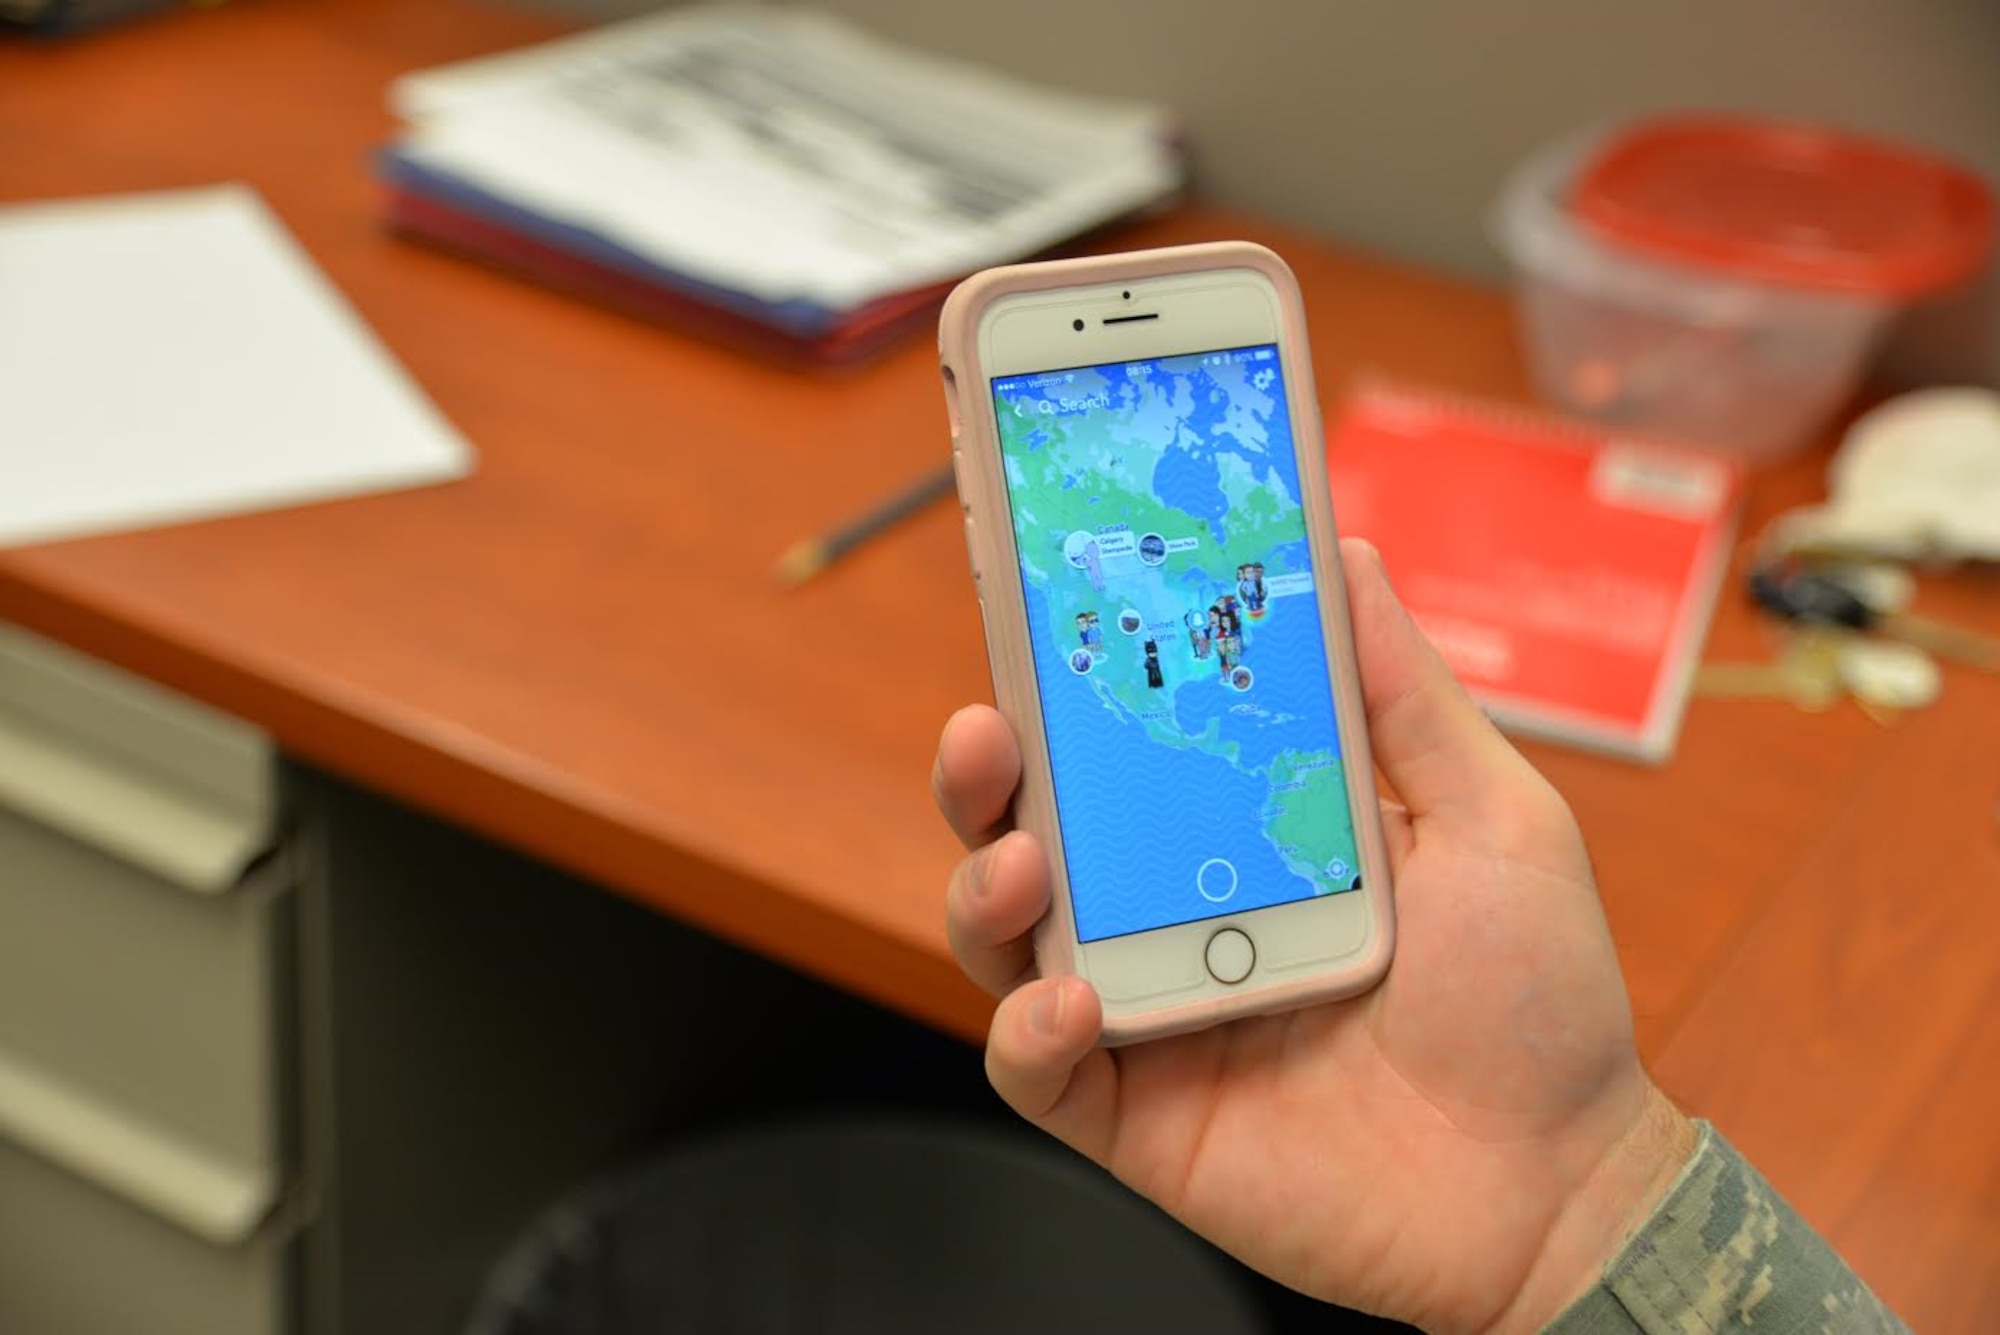 Snapchat introduced a new feature that allows users to track other users on a map. The map can be used to view their stories and see their location in real time. If a user does not want to be seen, they can activate “Ghost Mode” and be removed from the map. (U.S. Air Force photo by 2nd Lt. Savannah Stephens)